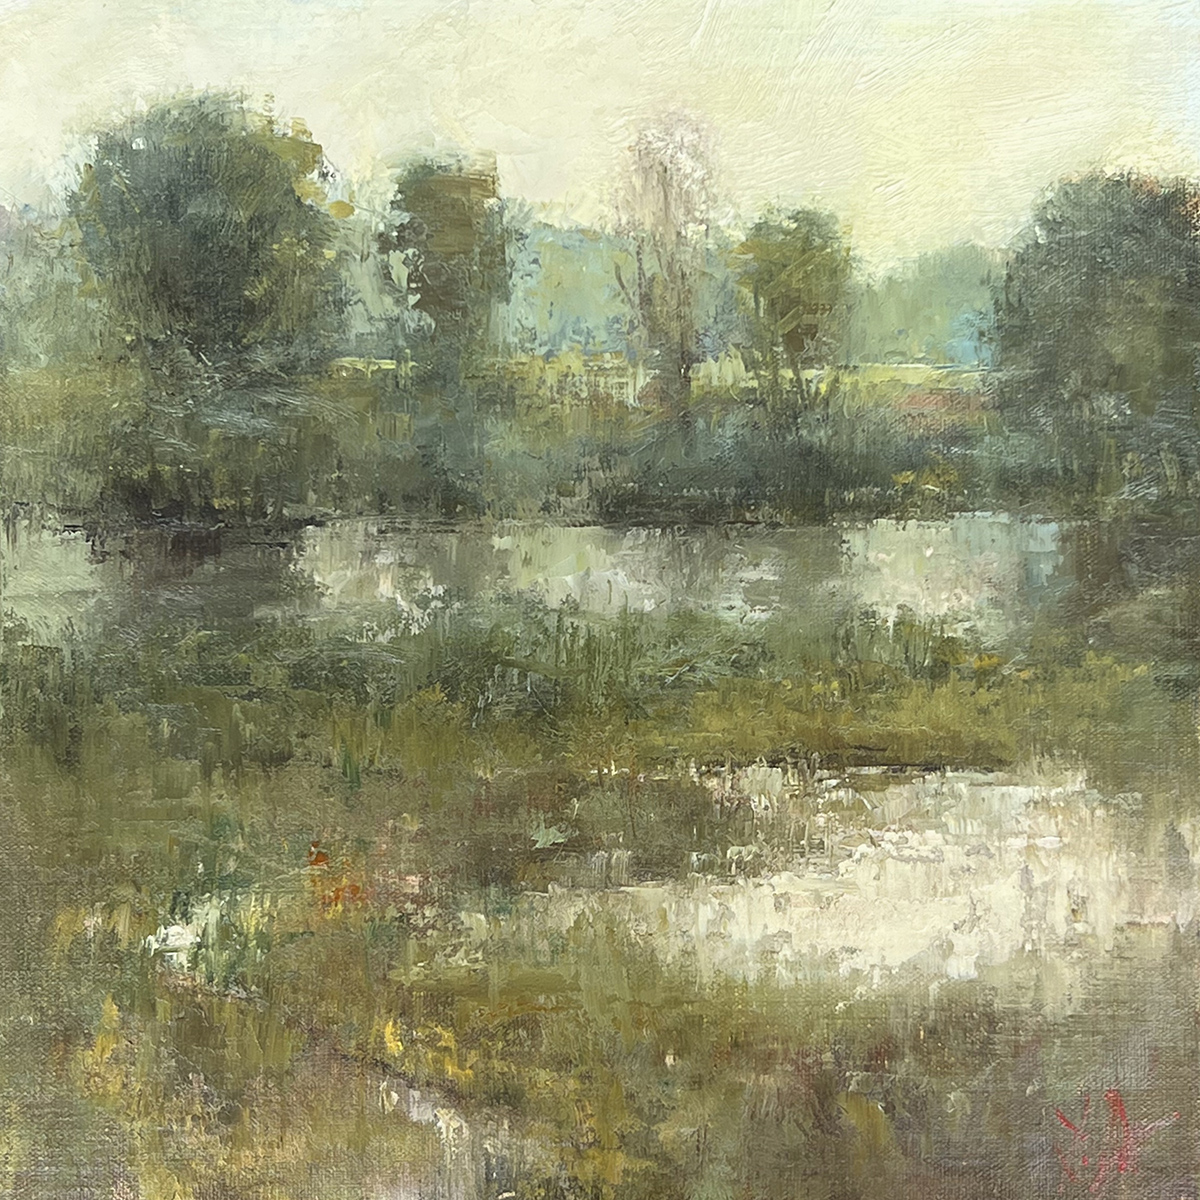 oil painting of impressionist style of river bend flowing through foreground and mid-ground with grass and trees in the background